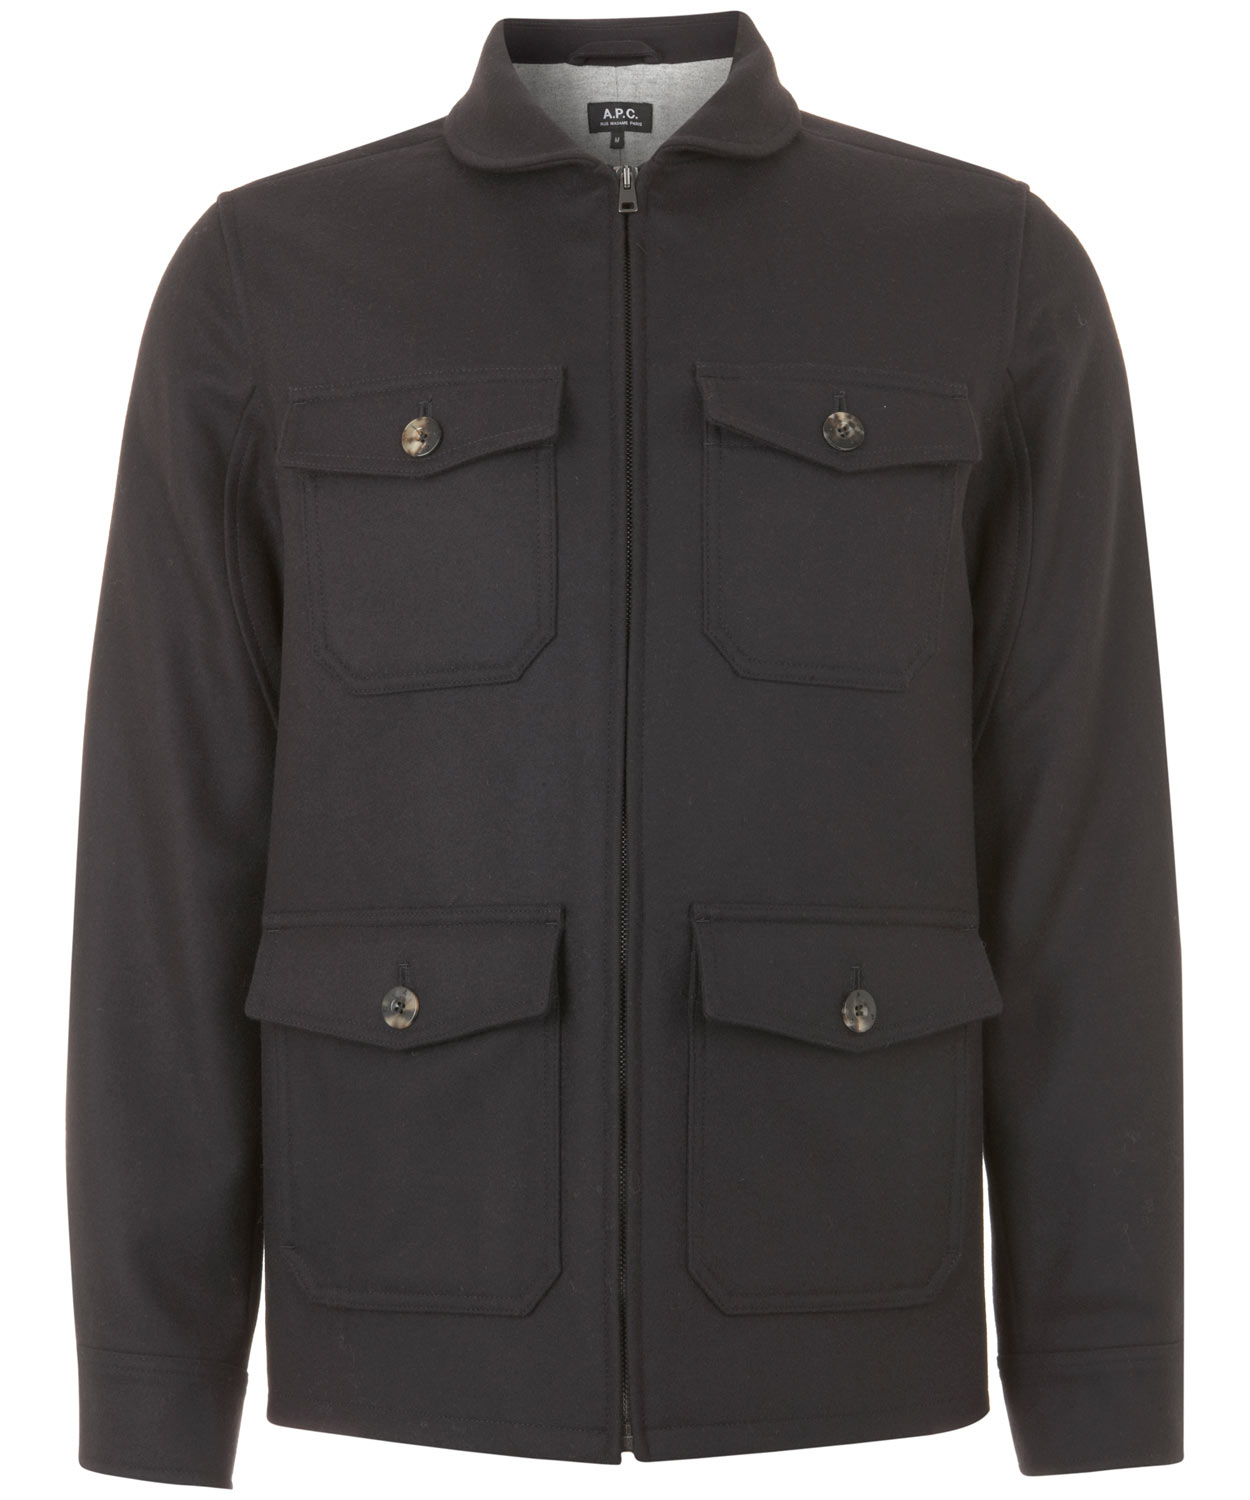 A.p.c. Navy Four Pocket Wool Jacket in Blue for Men | Lyst